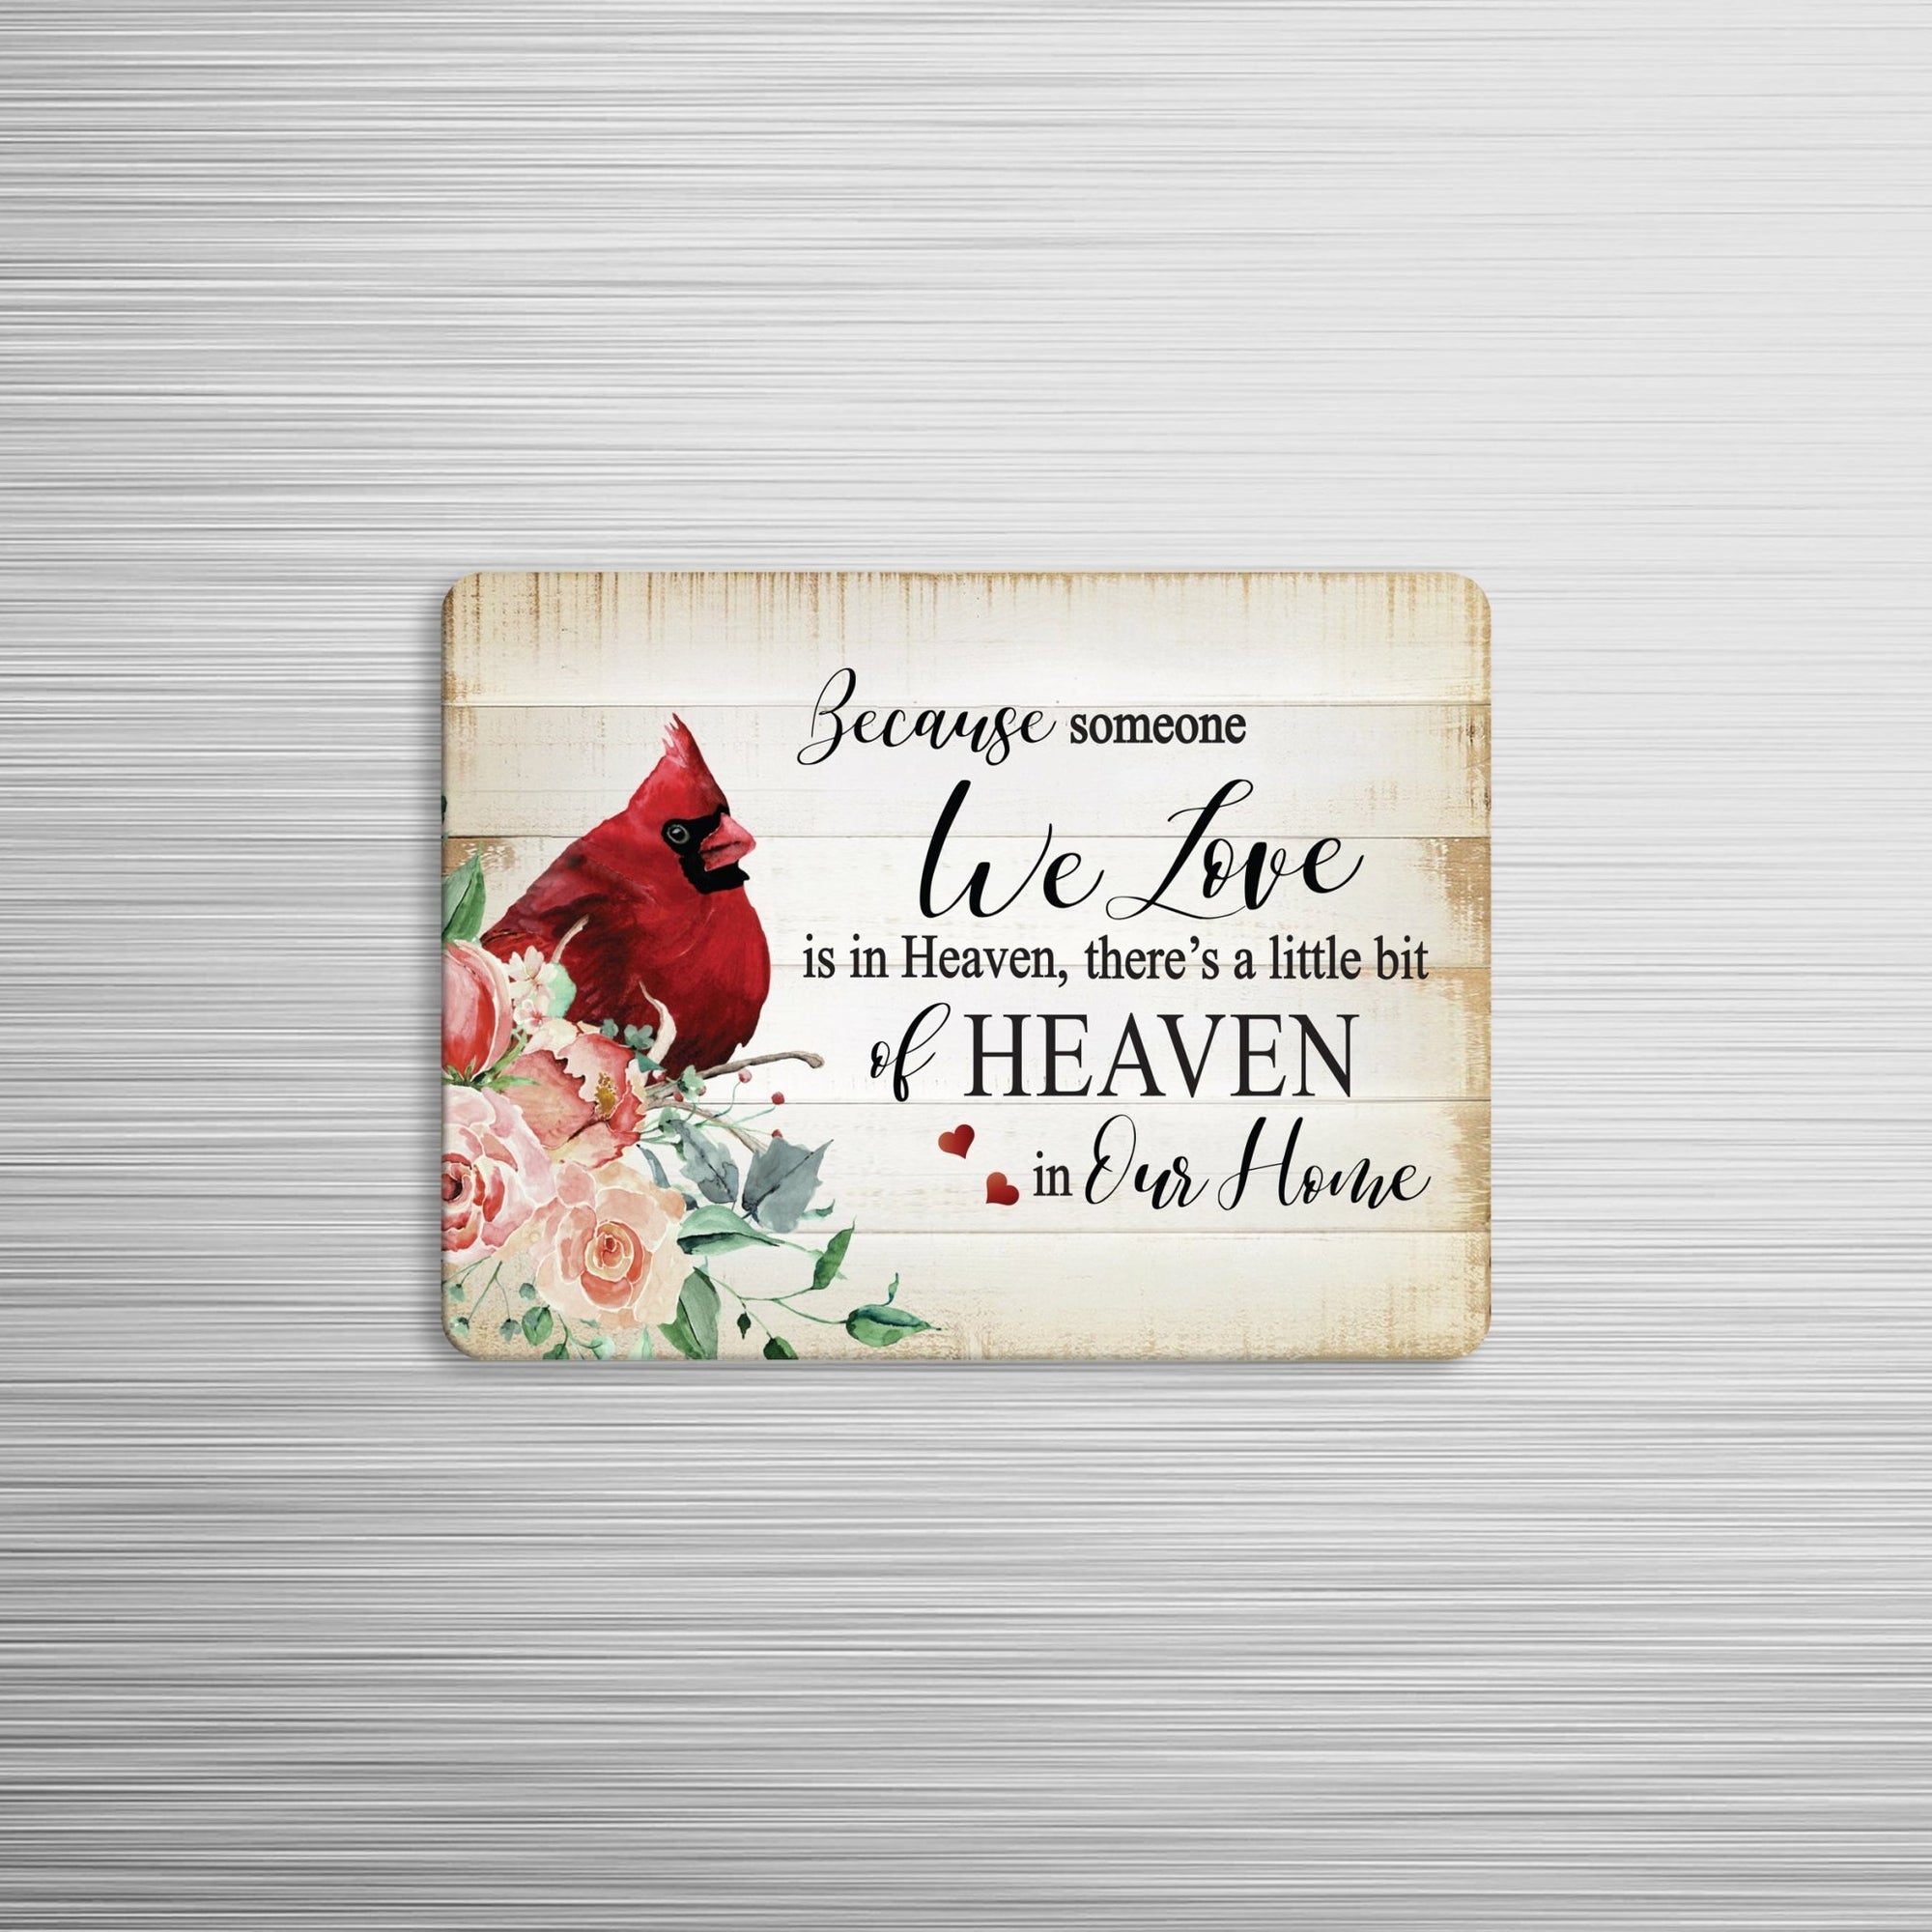 A cardinal magnet that serves as a lasting memorial decoration, offering comfort and solace.